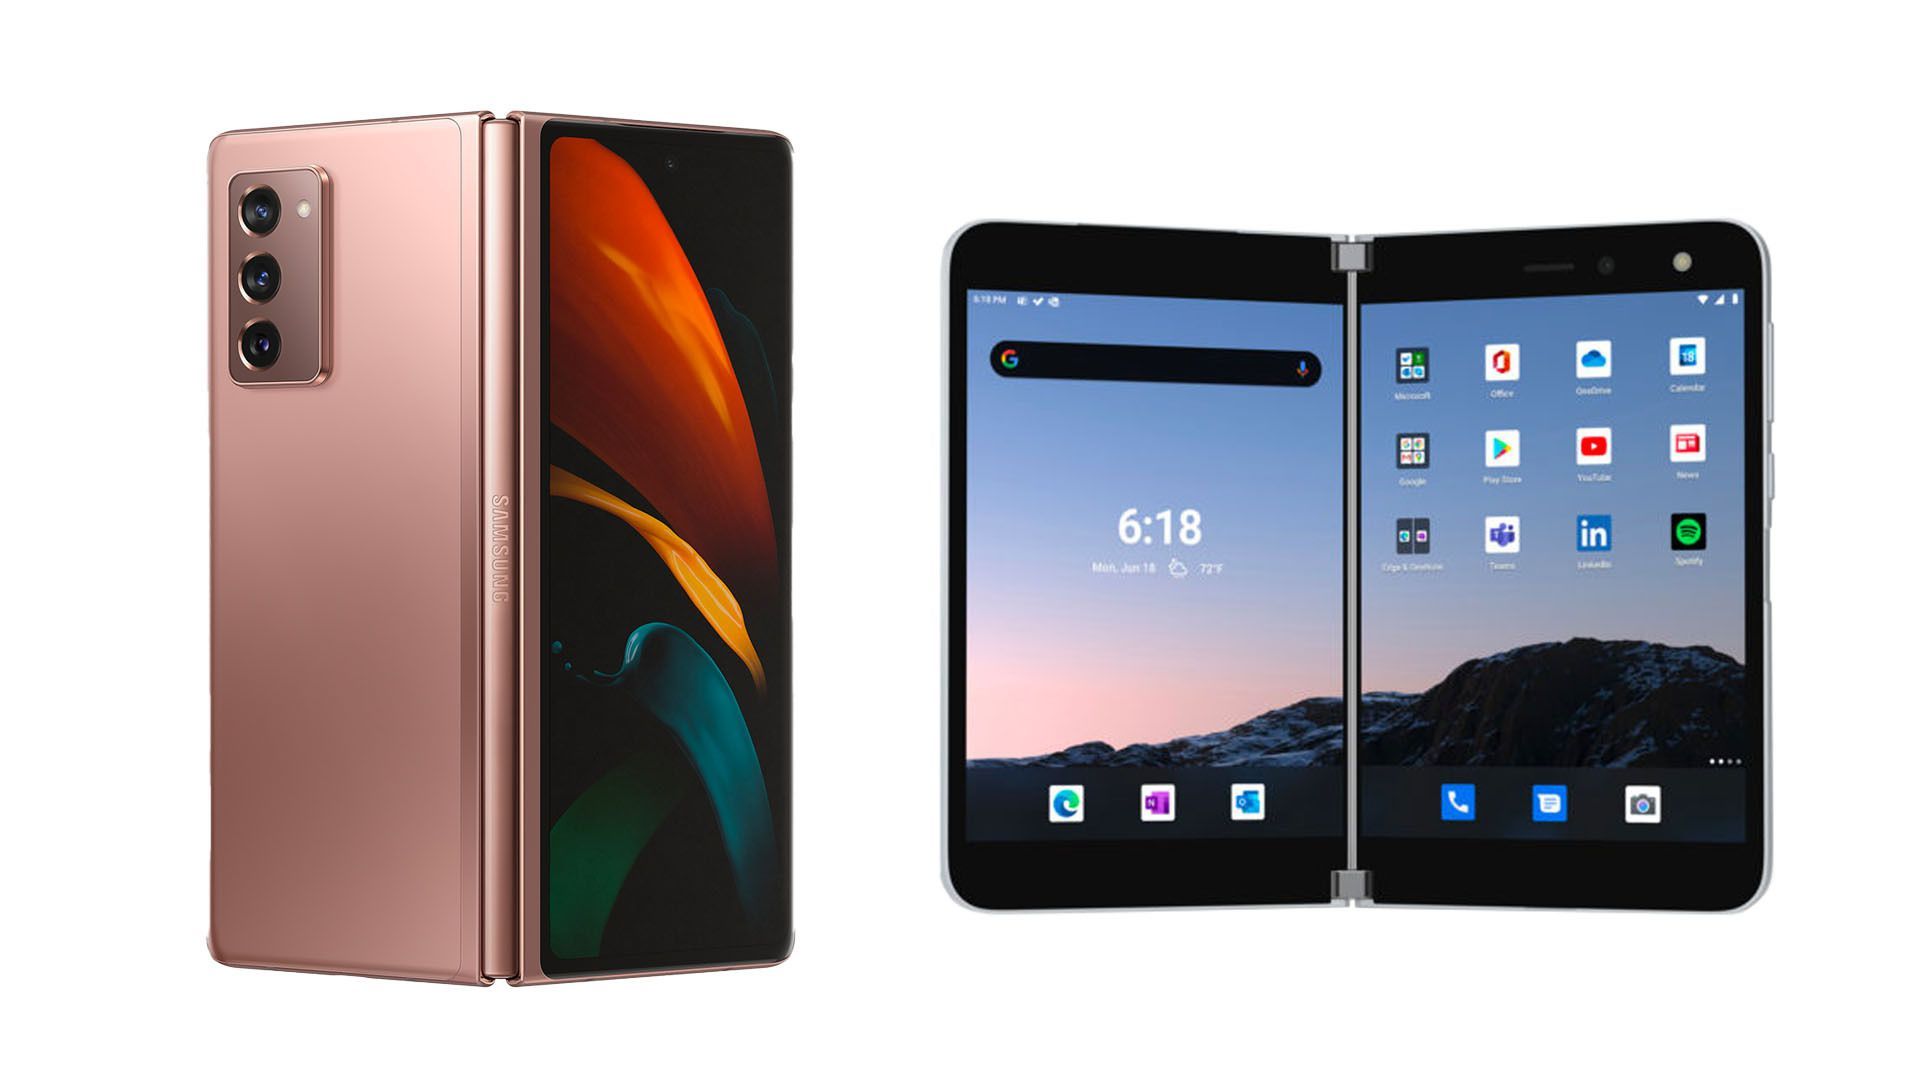 Samsung's Galaxy Z Fold 2 (left) and Microsoft's Surface Duo. Photos: Samsung and Microsoft